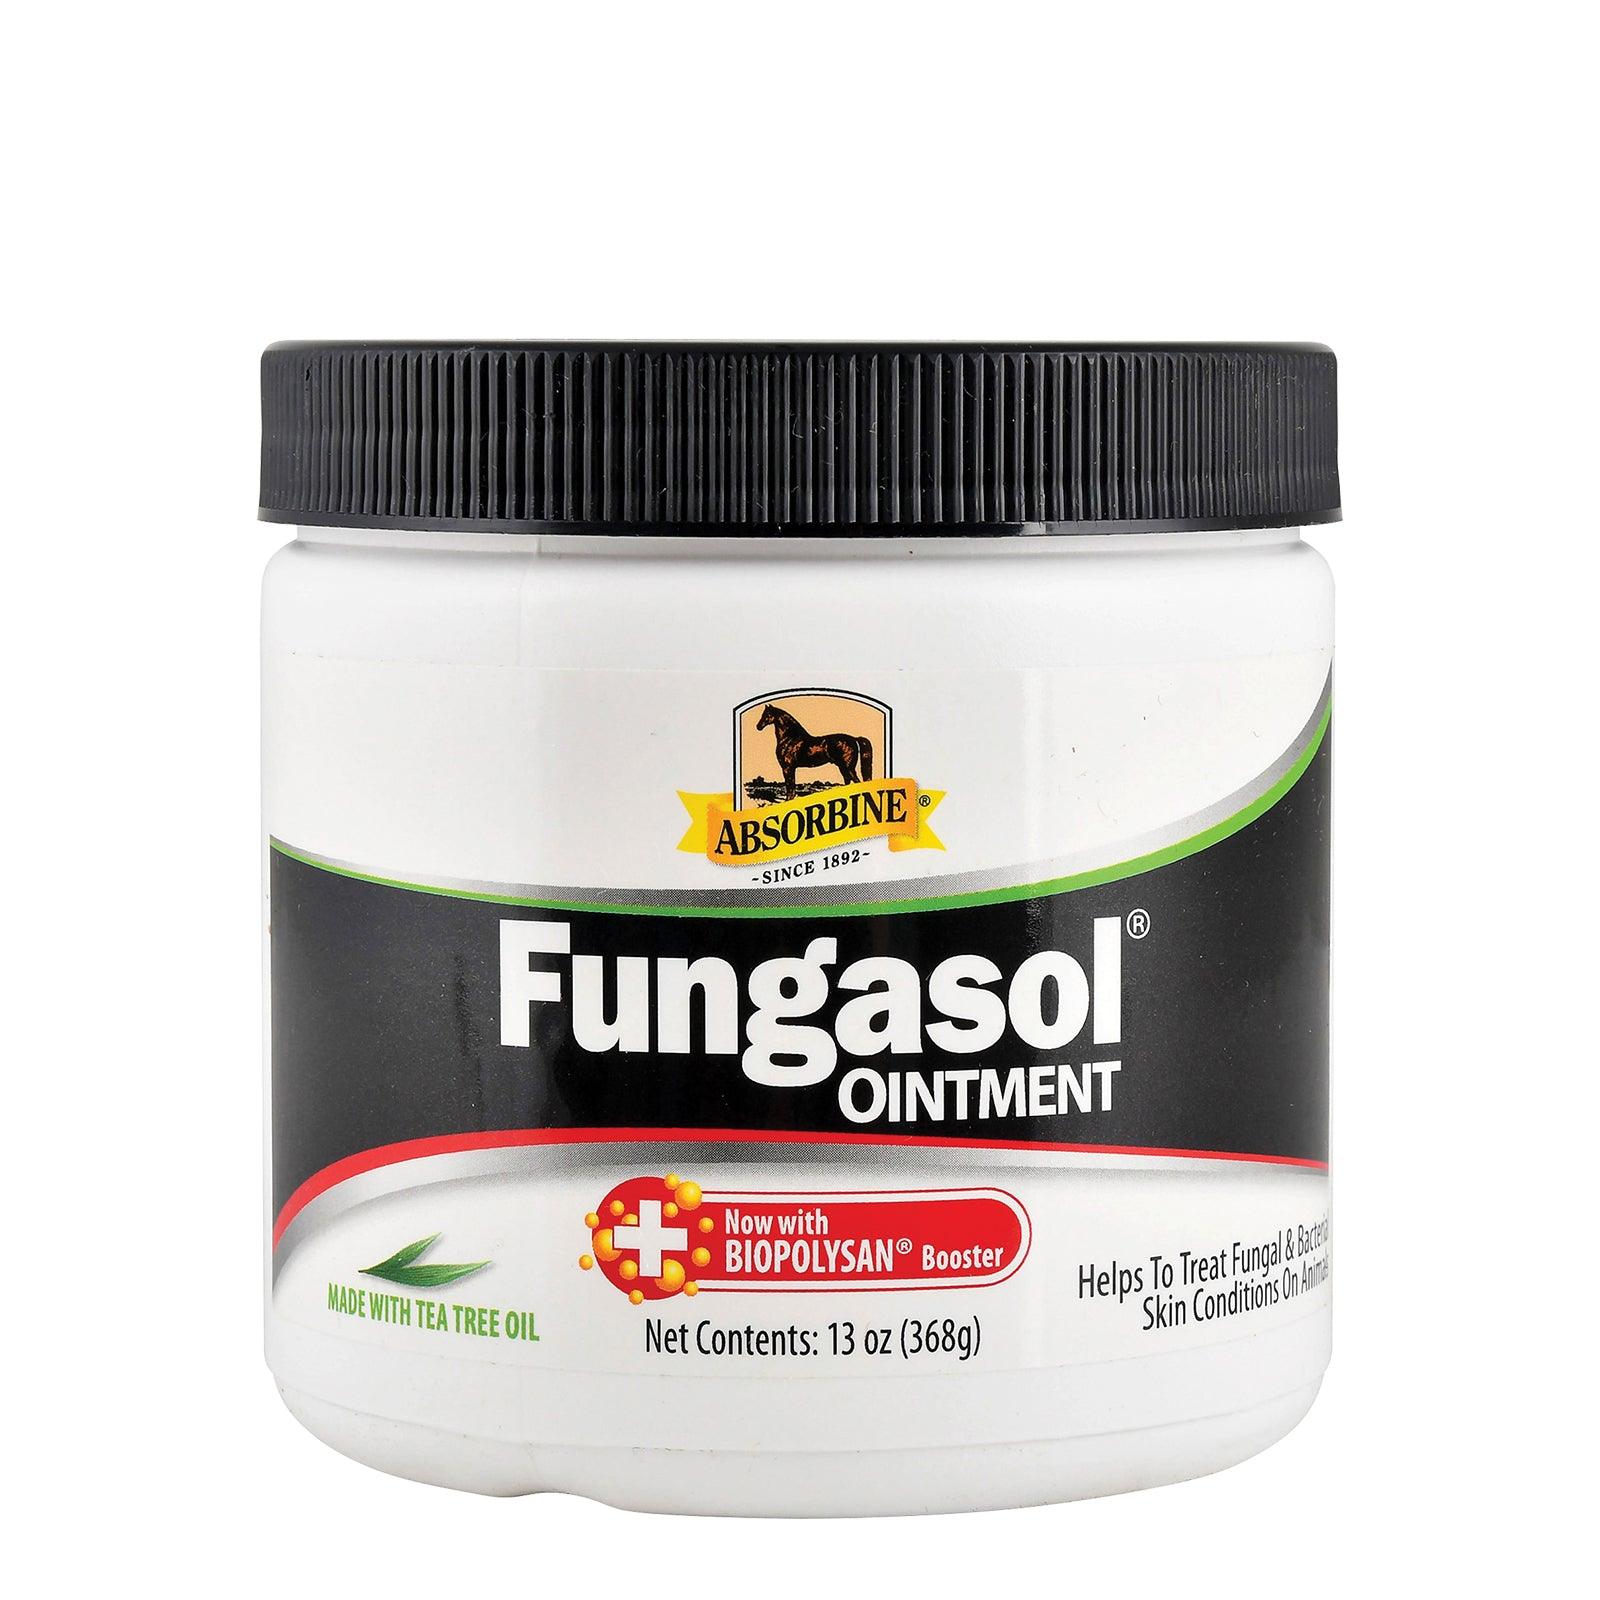 Absorbine Fungasol Ointment made with tea tree oil.  Now with biopolysan booster.  Helps fight fungal and bacterial skin conditions.